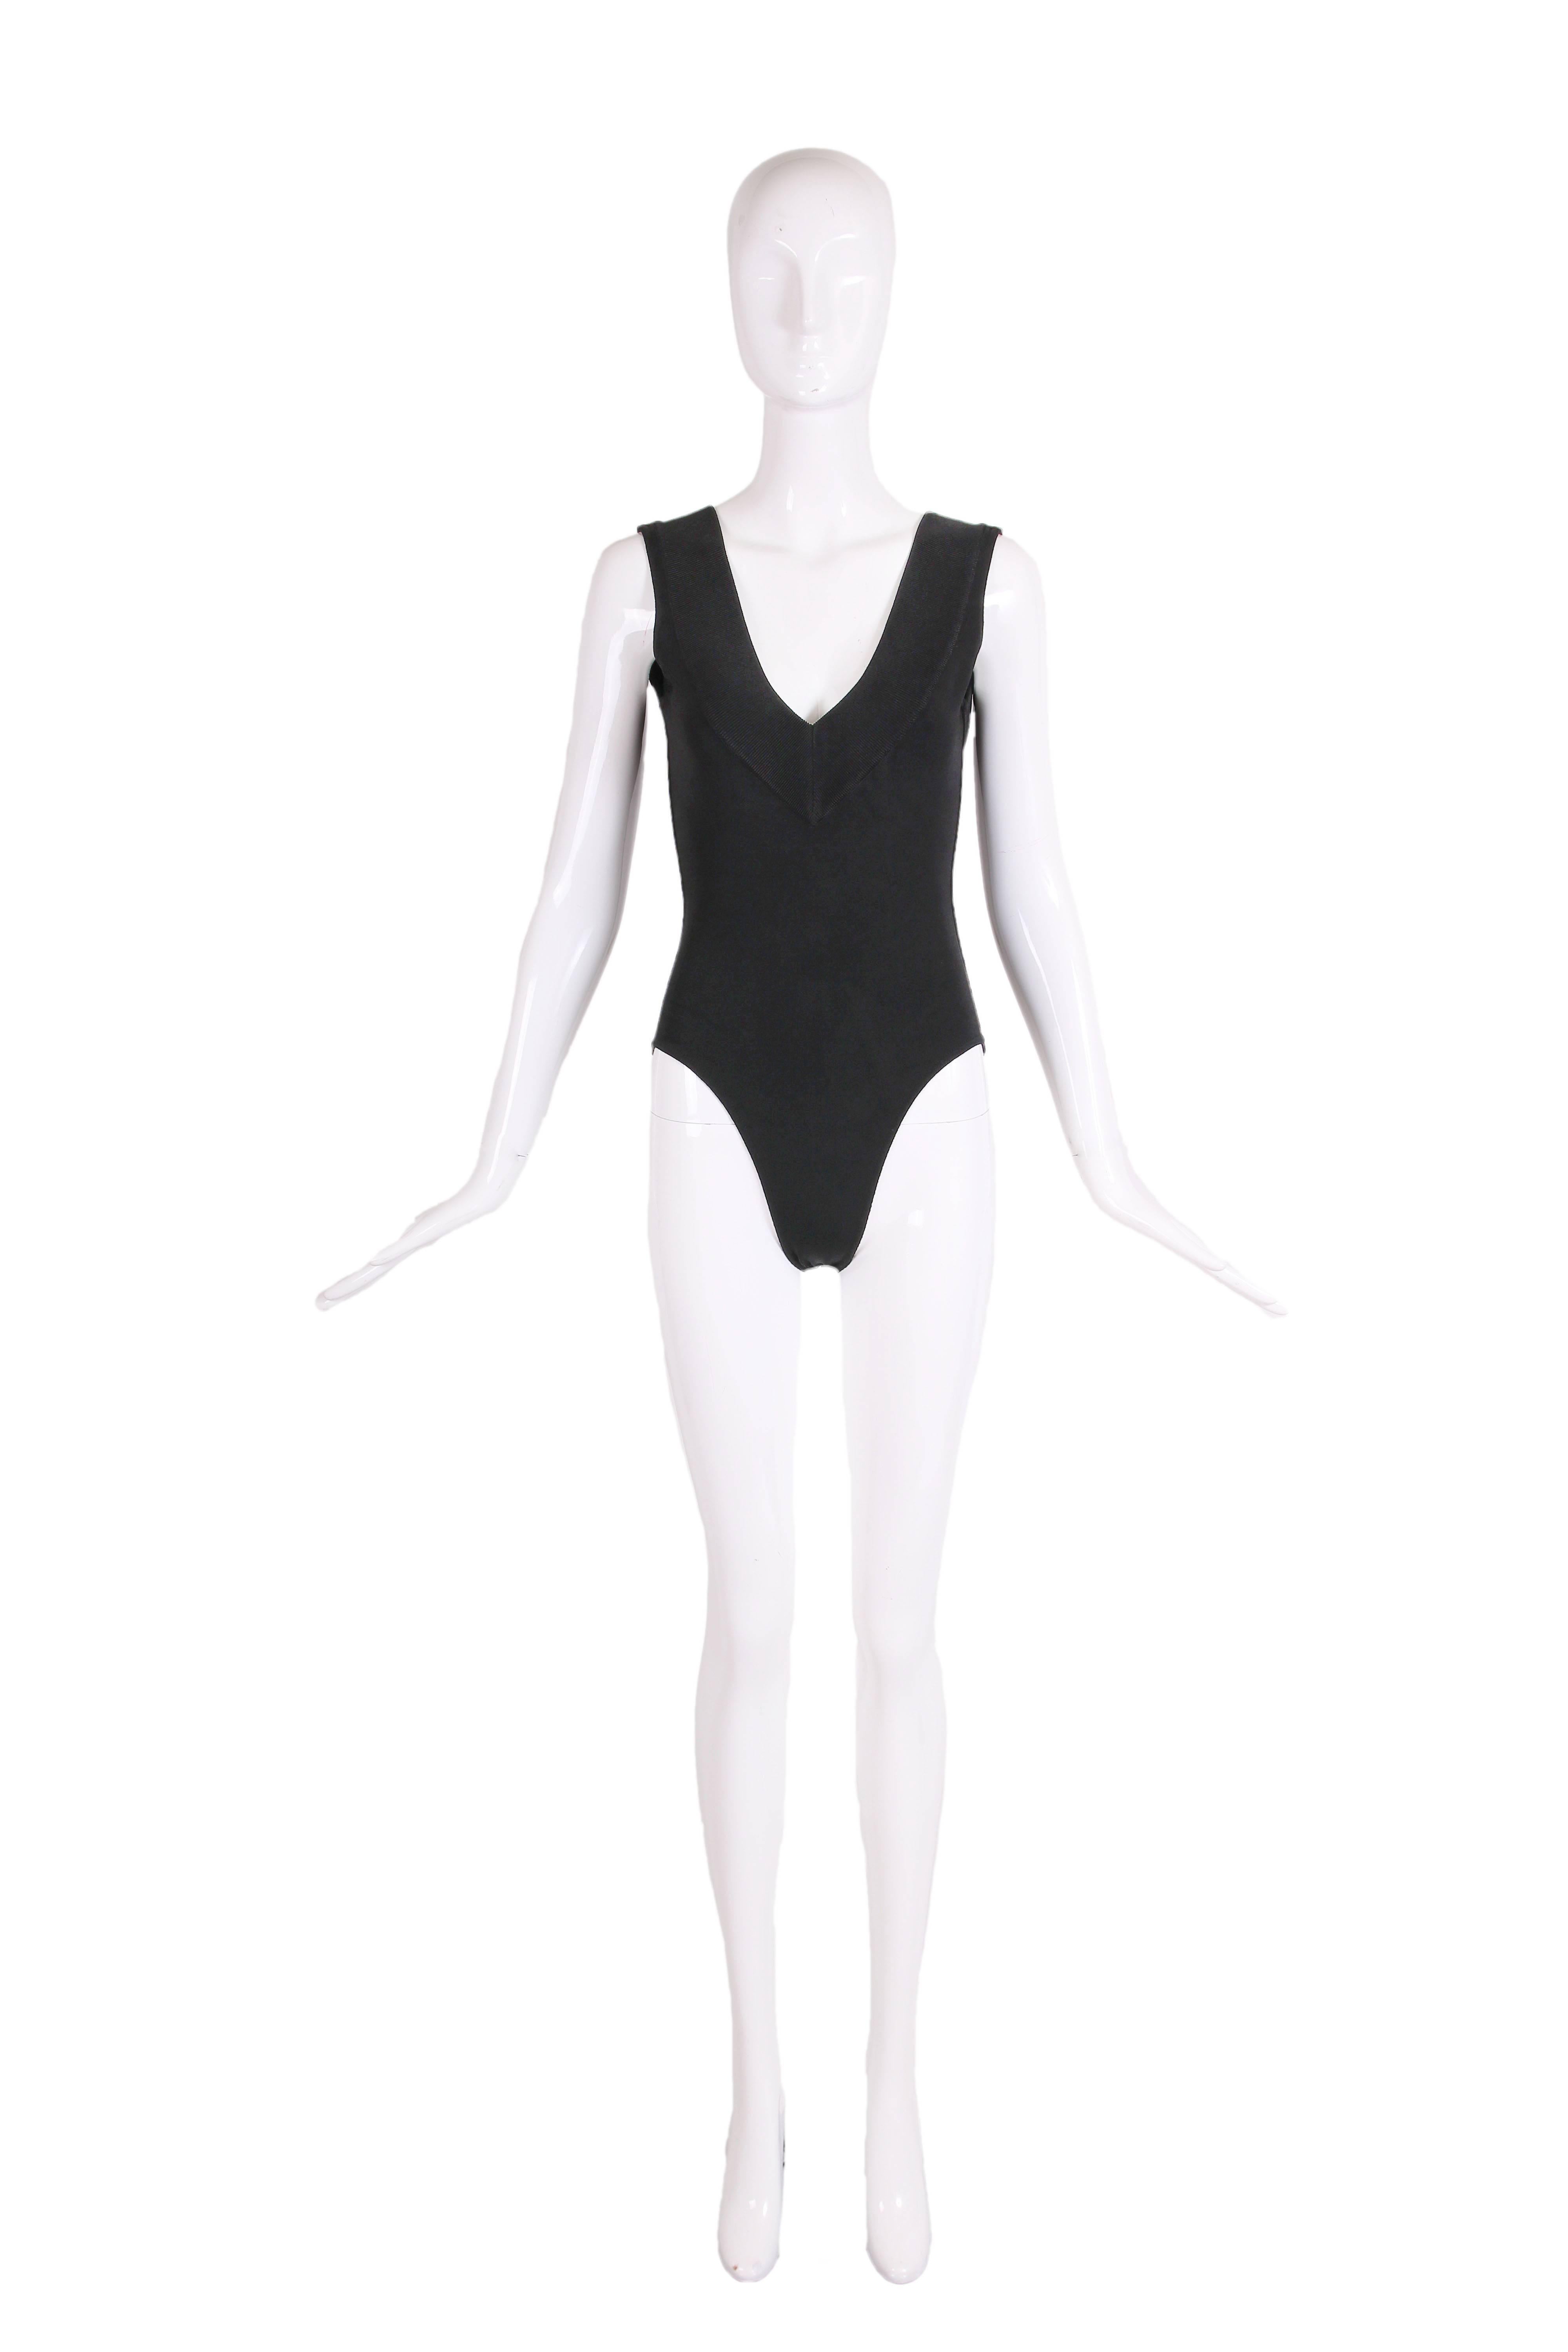 1990's Azzedine Alaia black stretch body suit with deep v-neckline at back and front. There are three snap closures at the bottom. In excellent condition - tag size Small - please consult measurements.